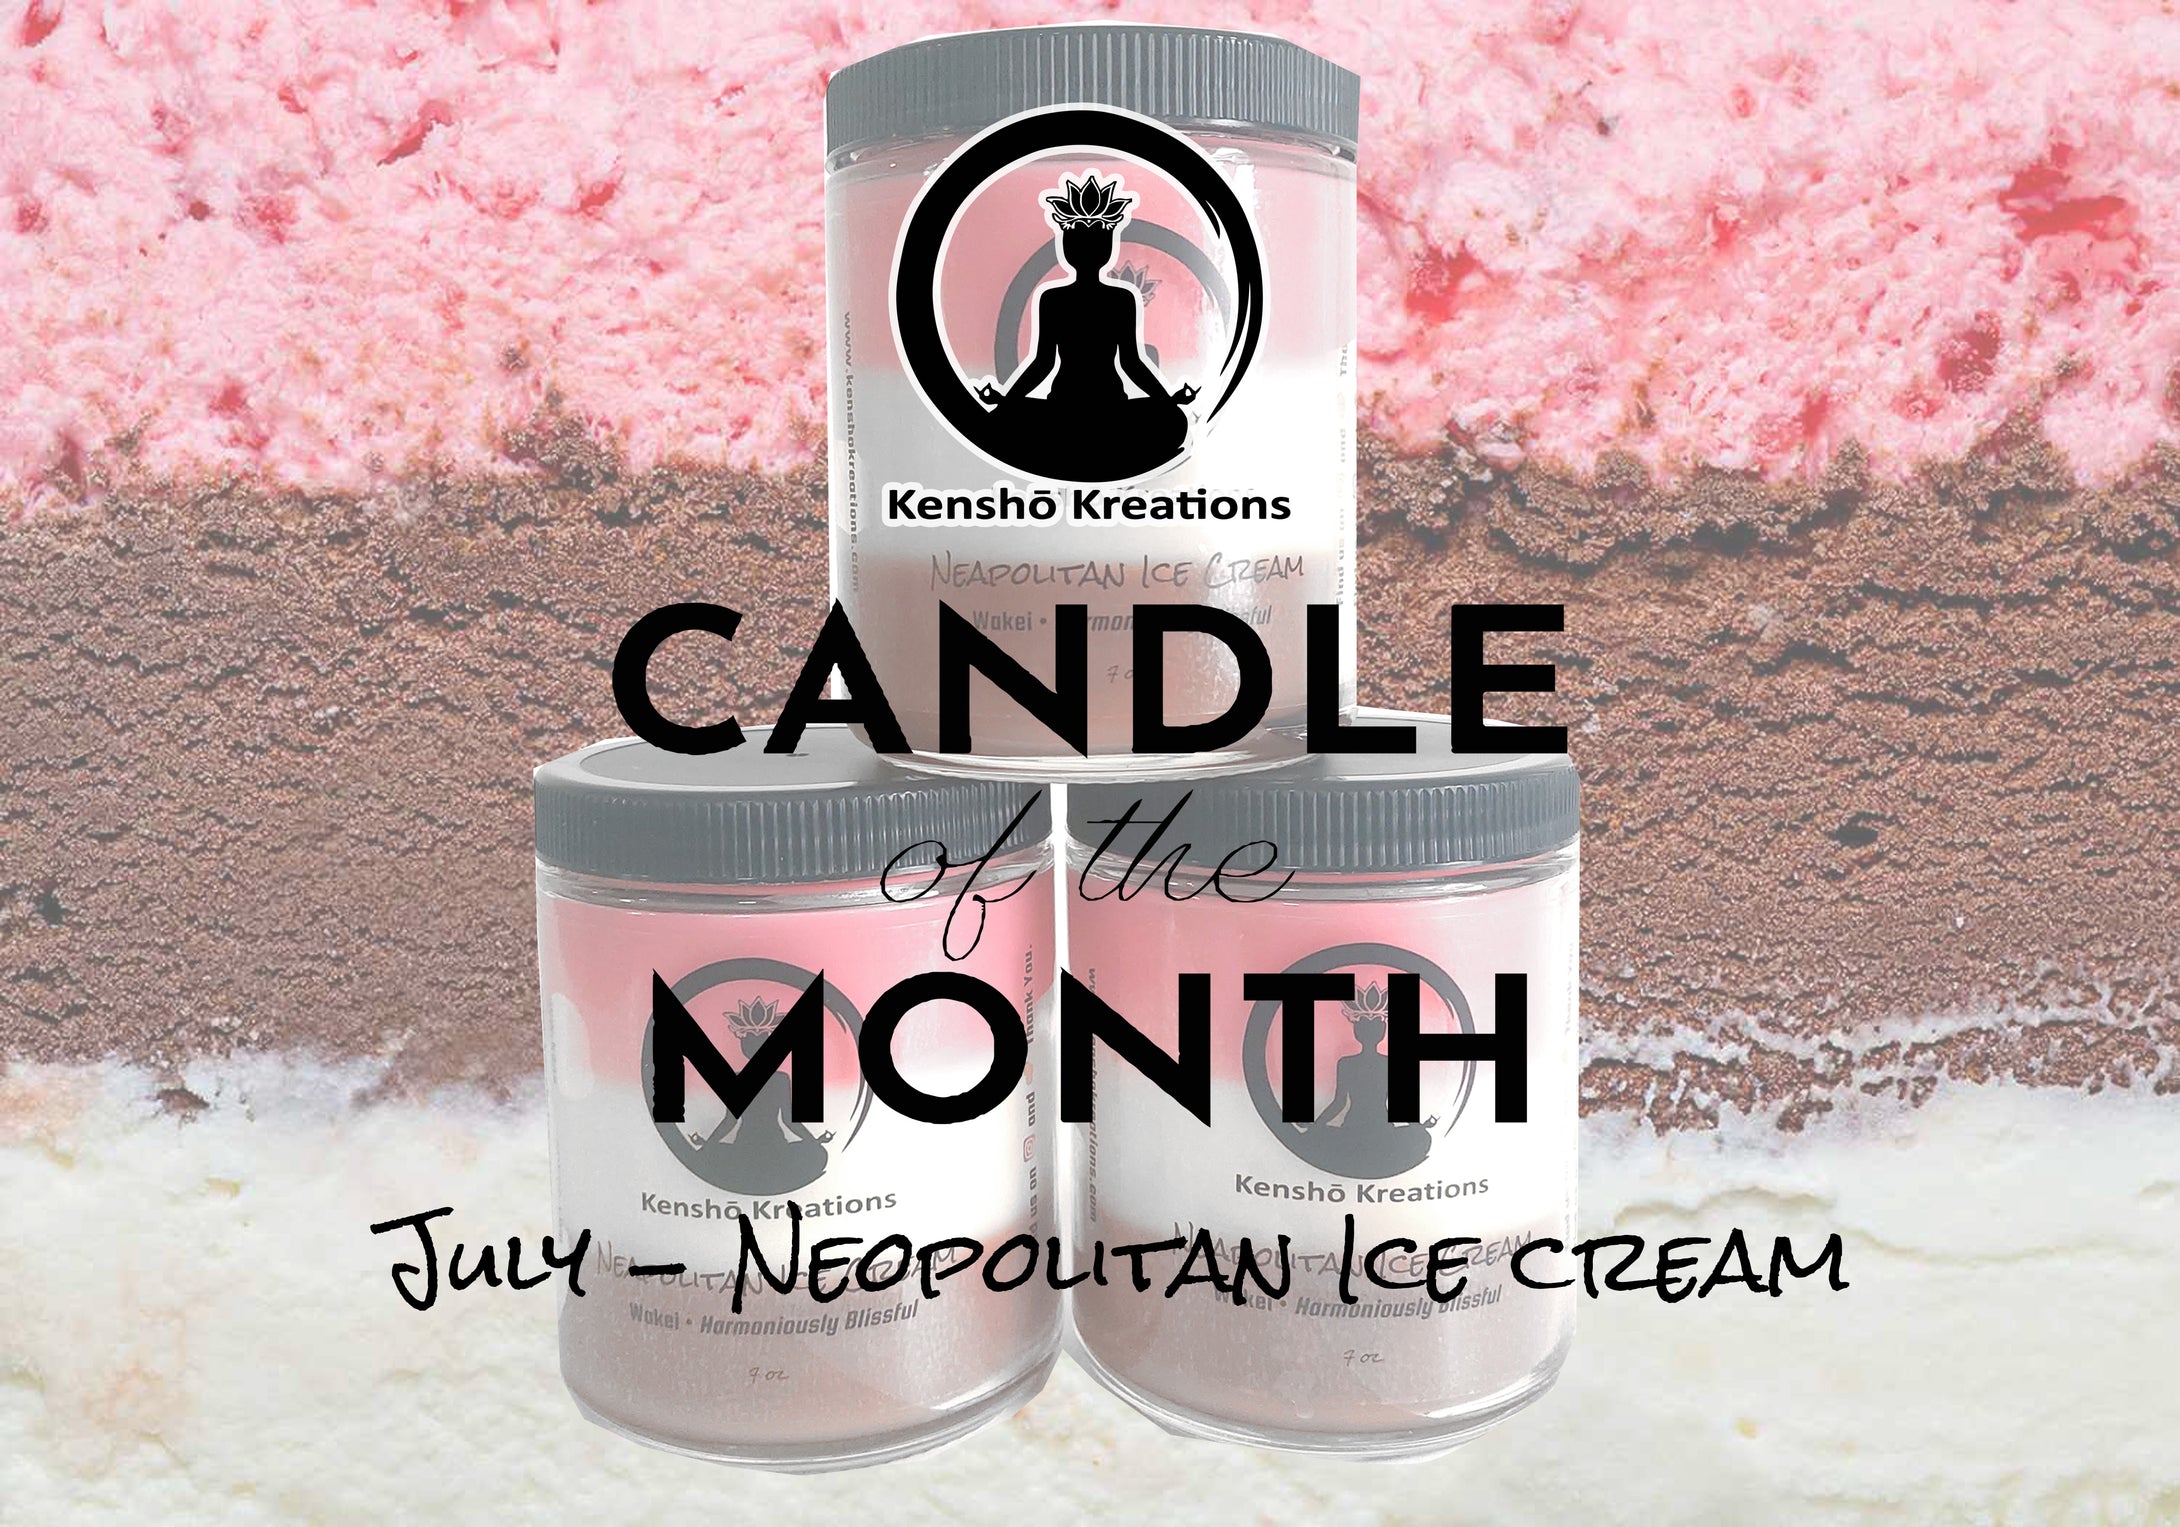 Candle of the Month - Neapolitan Ice Cream